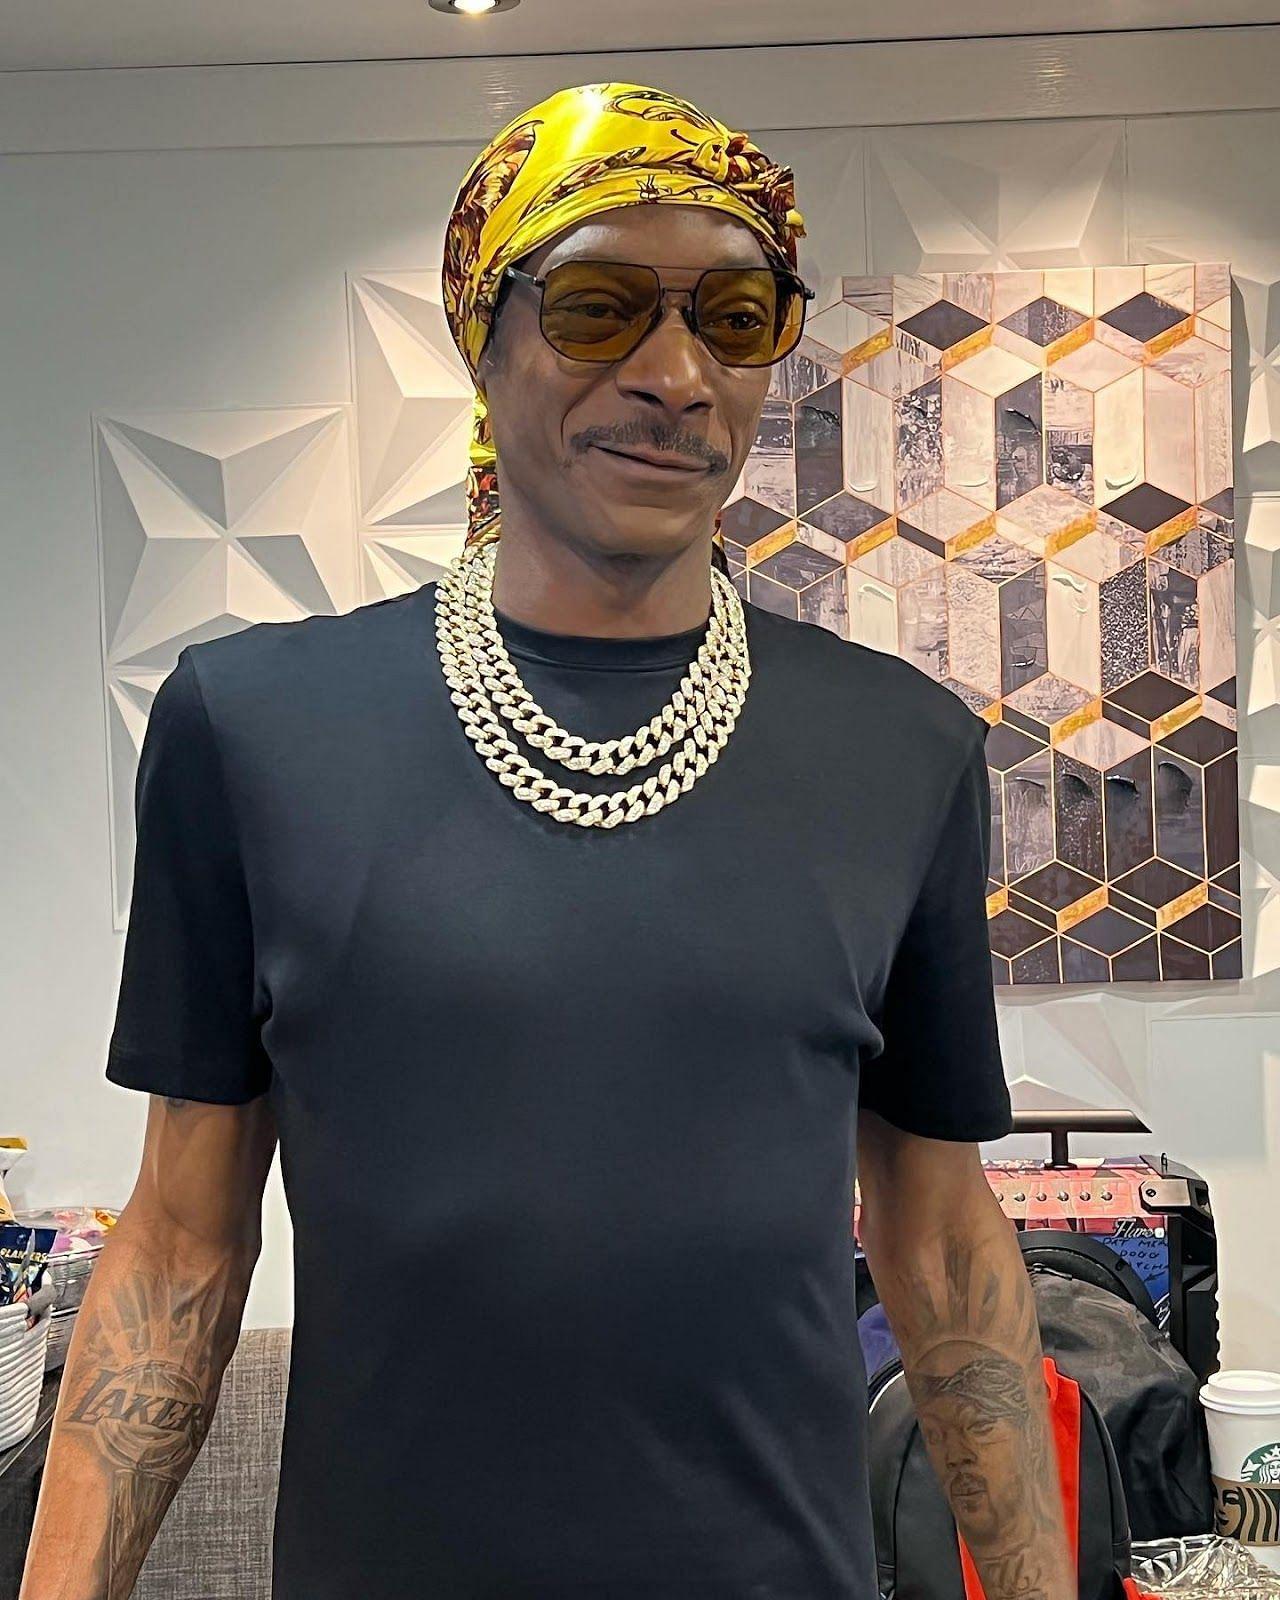 Is Snoop Dogg alive?